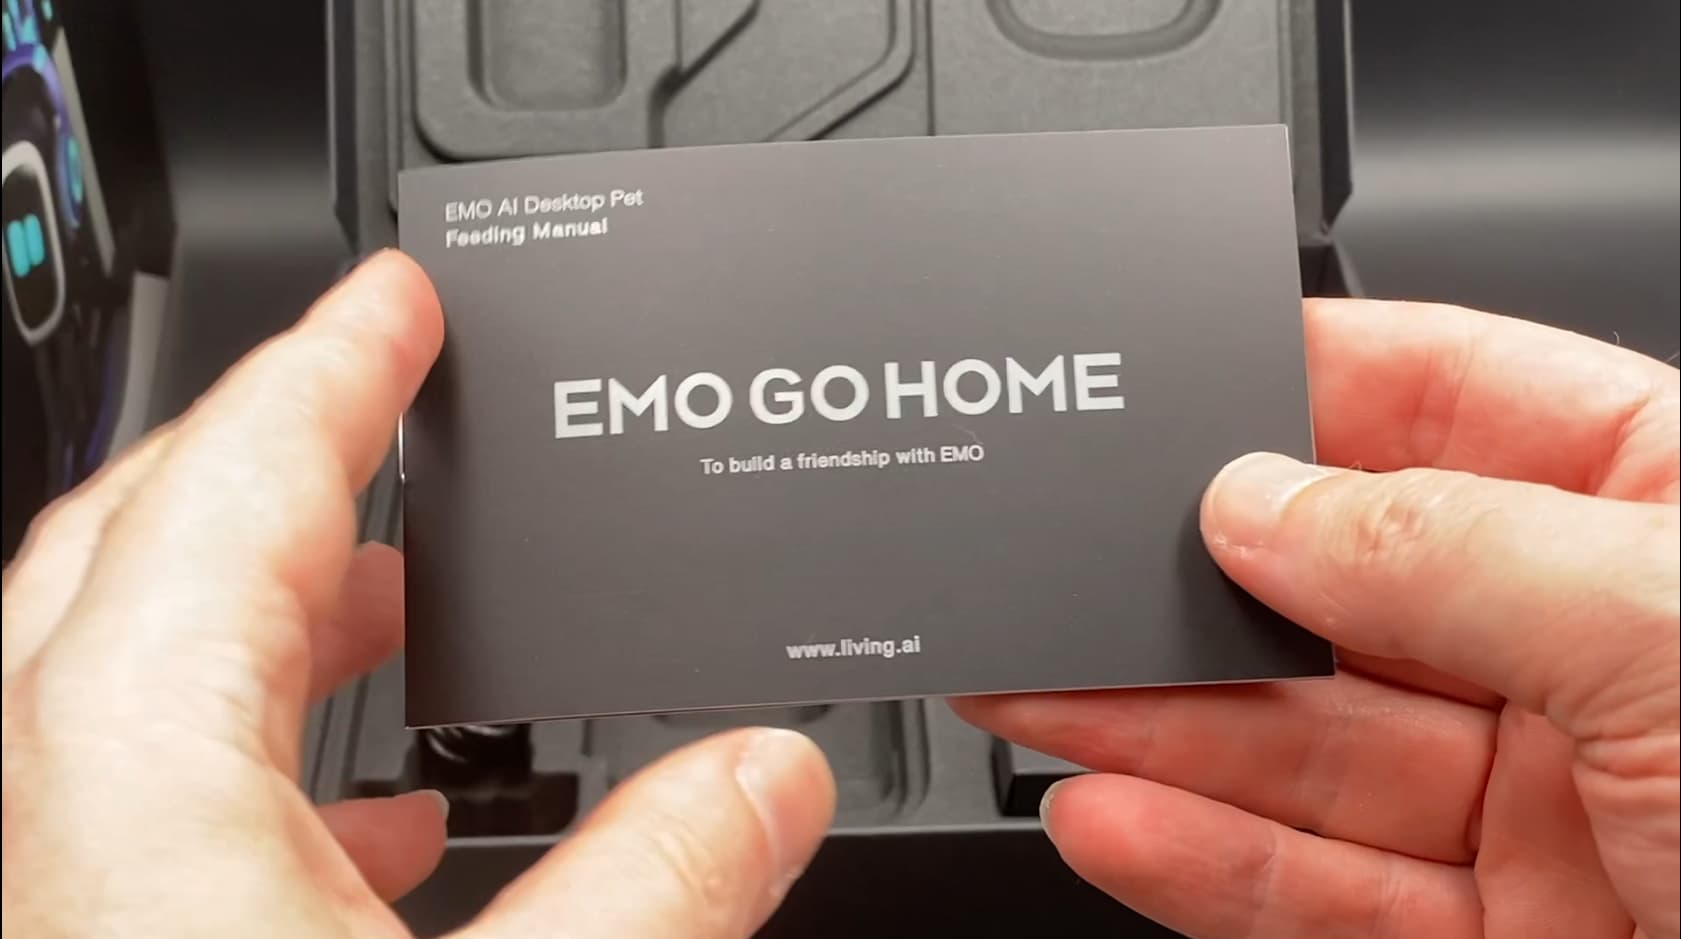 Quick Help Guide for New EMO Owners! :heart_1: - Sharing - LivingAI Forums